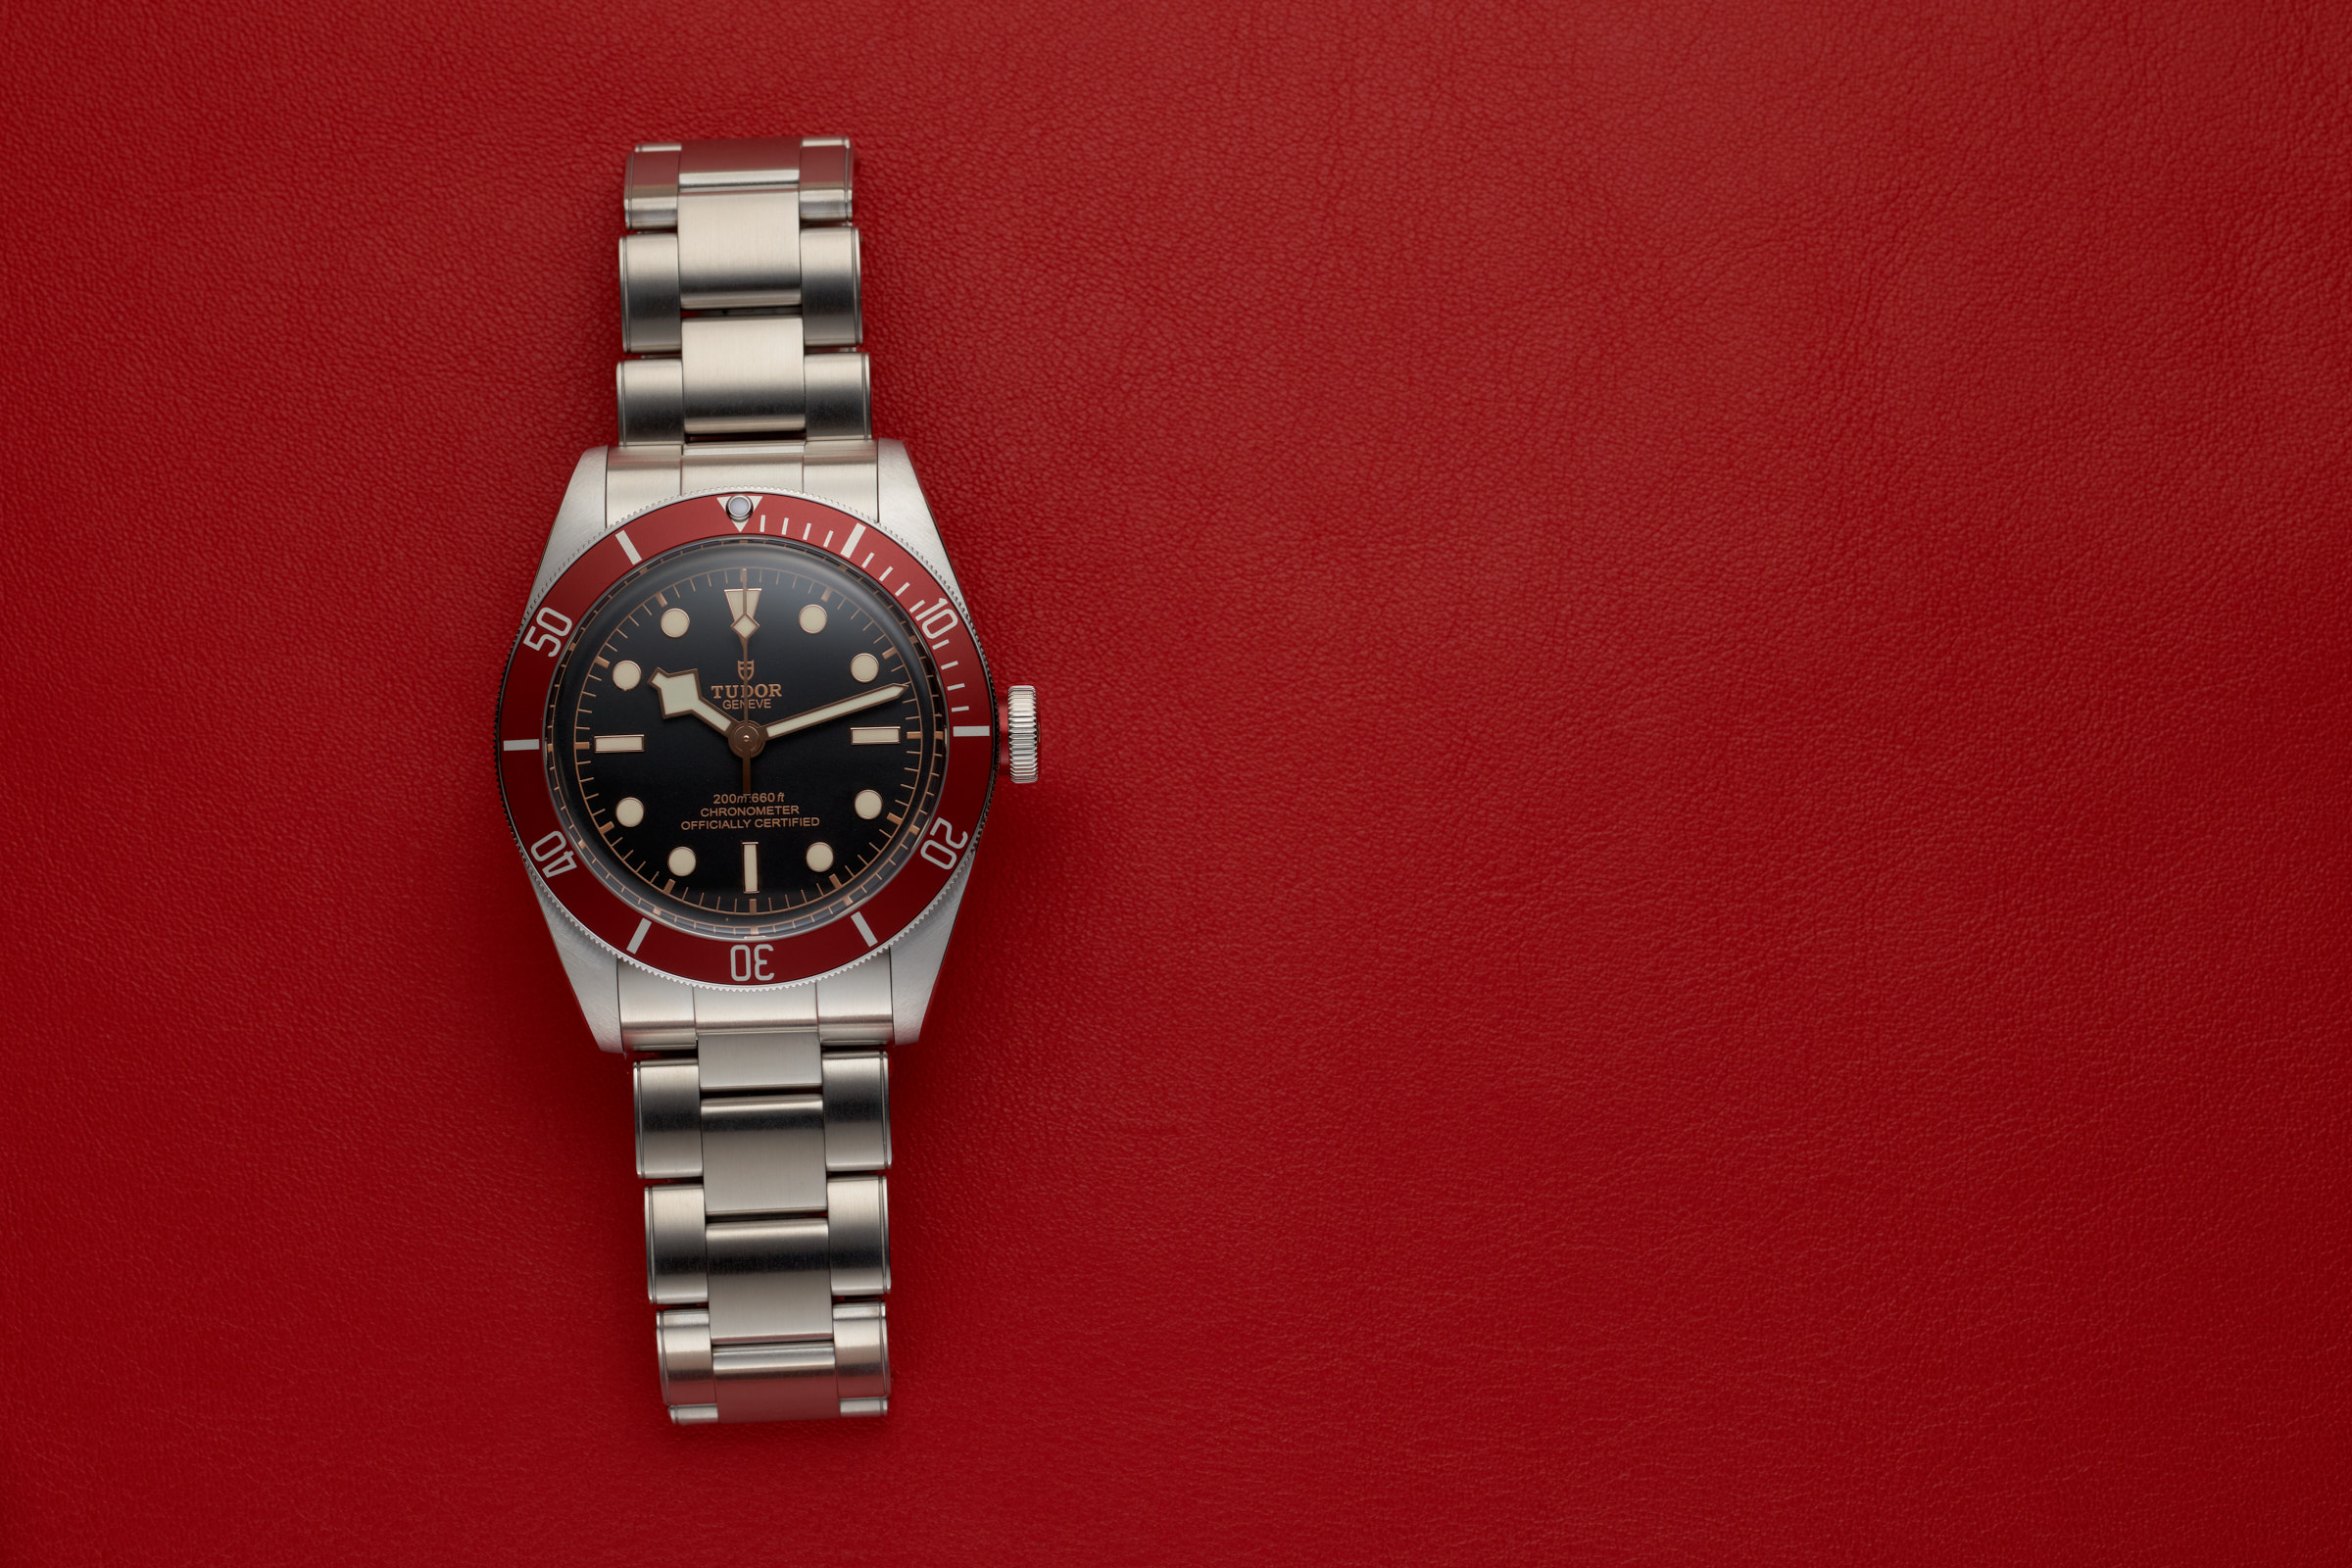 Tudor Black Bay 79230R on a red leather